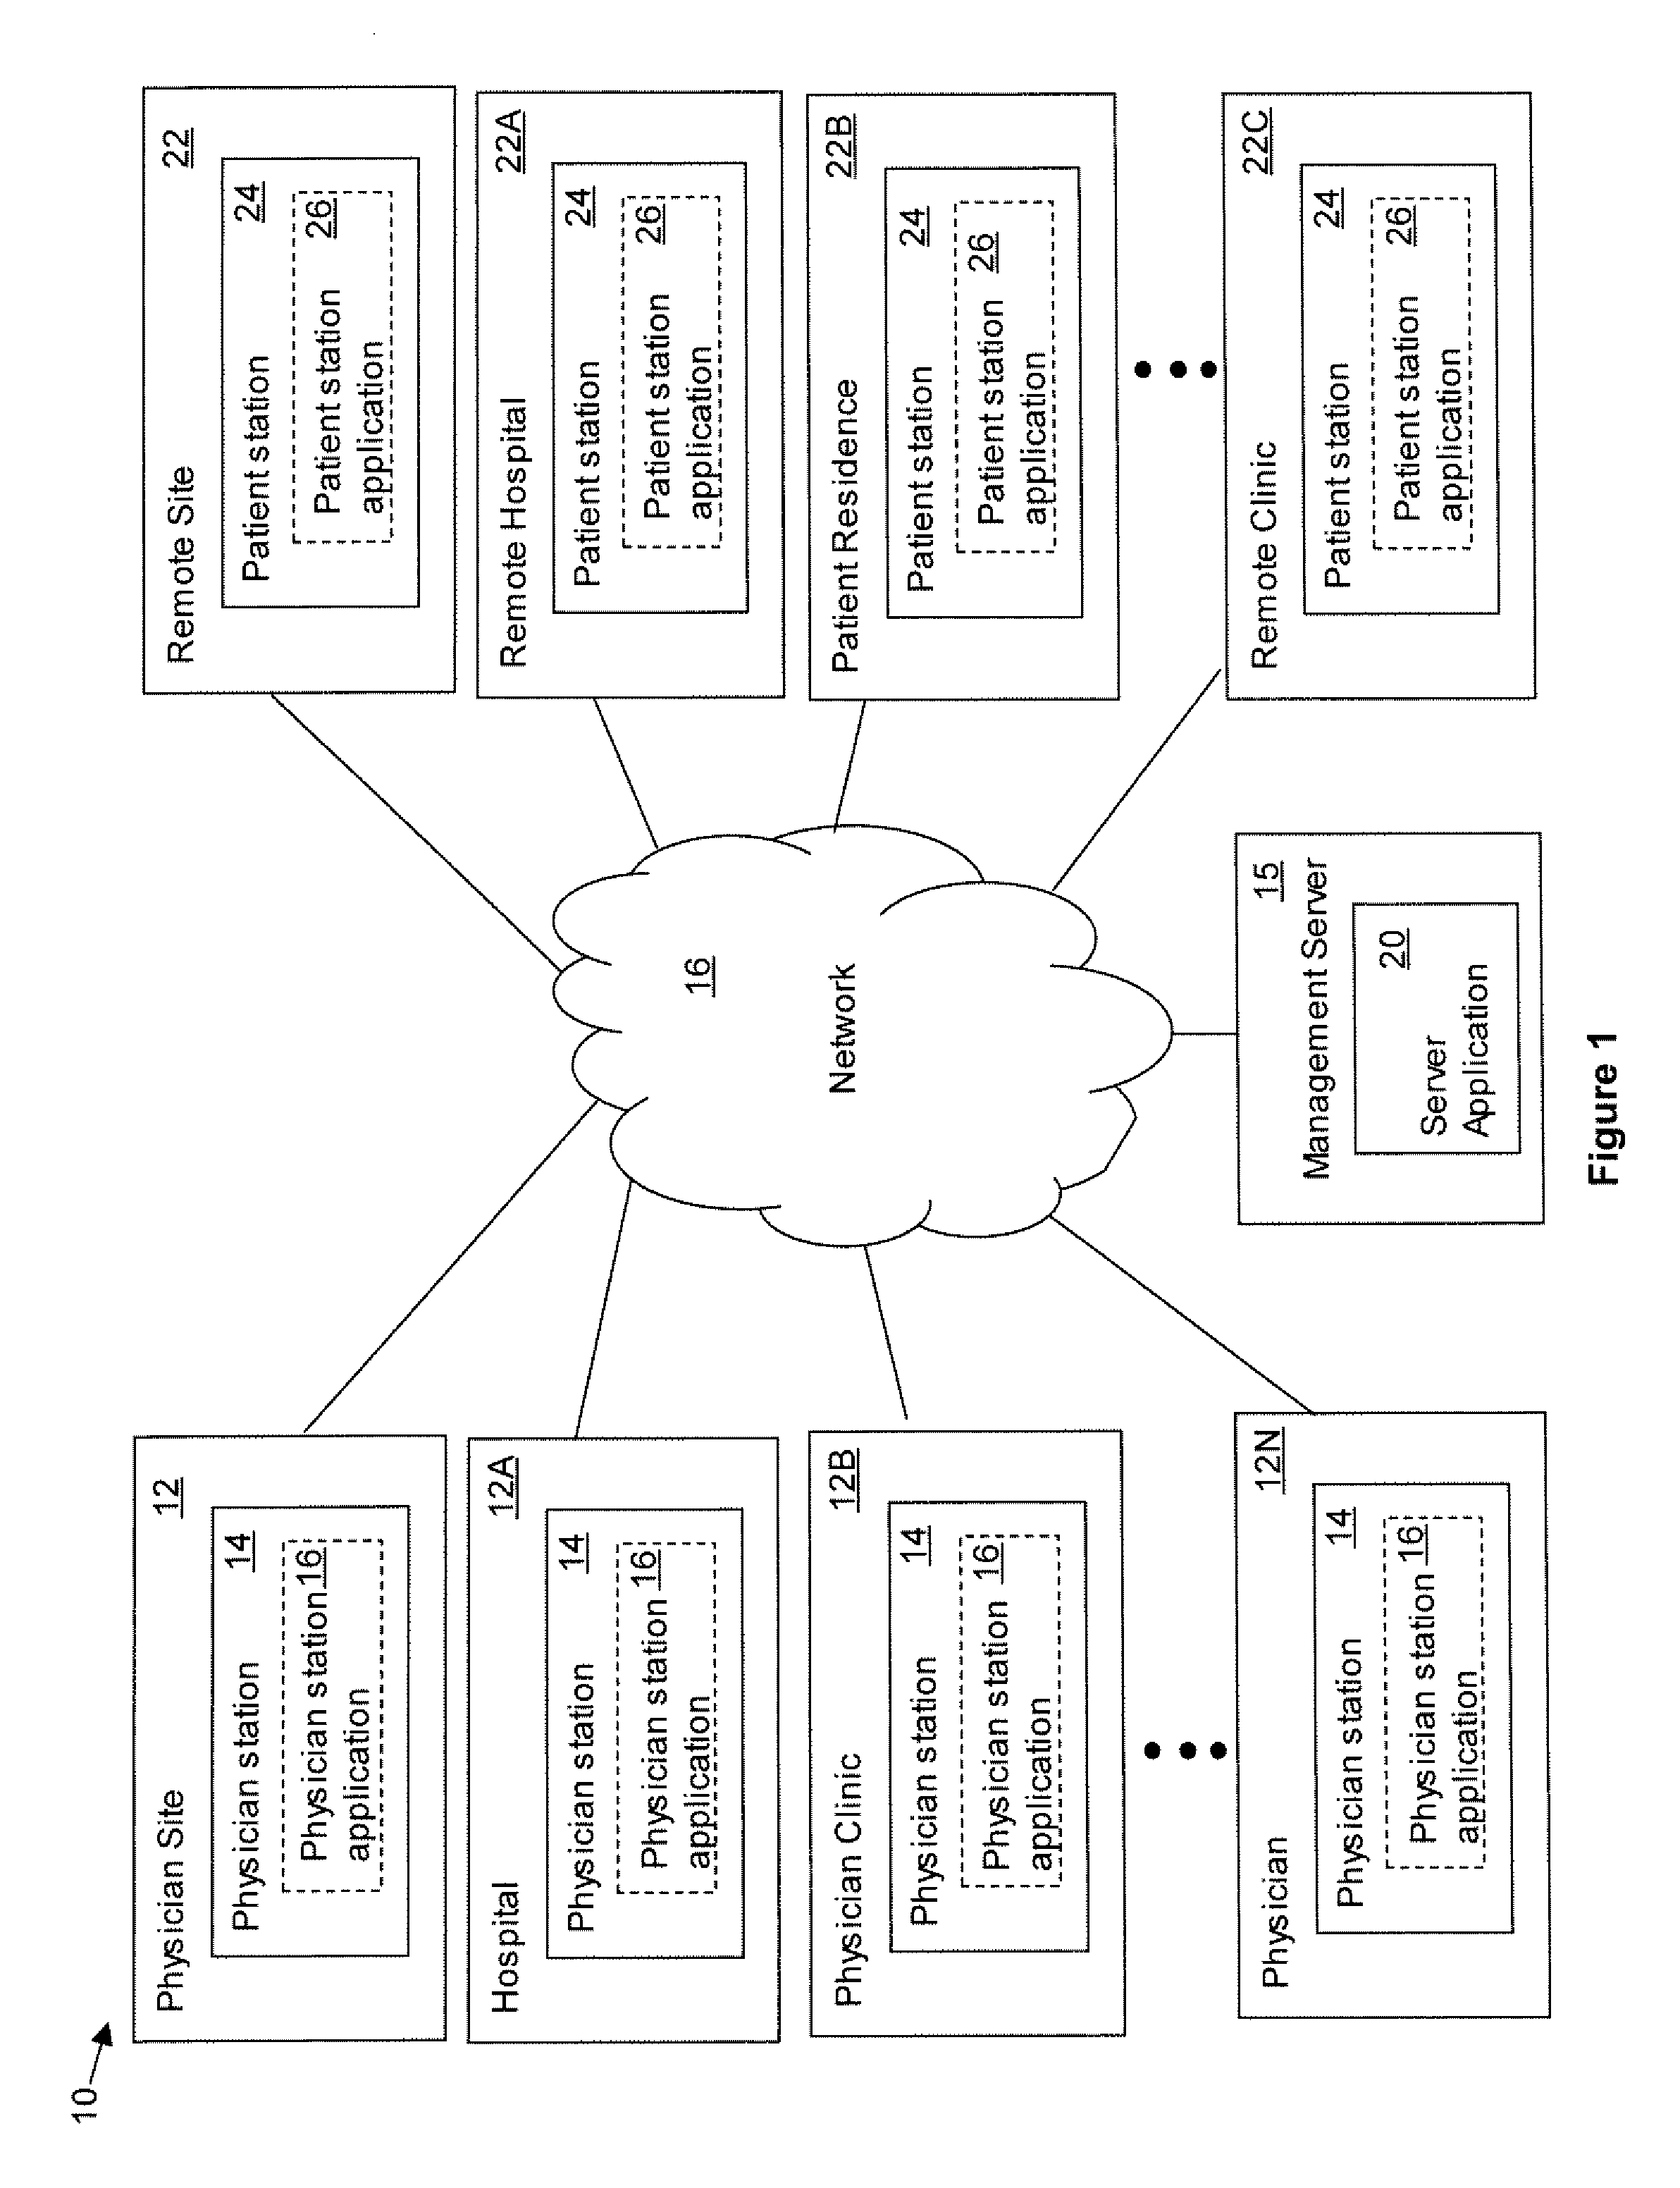 System and method for remote medical device operation